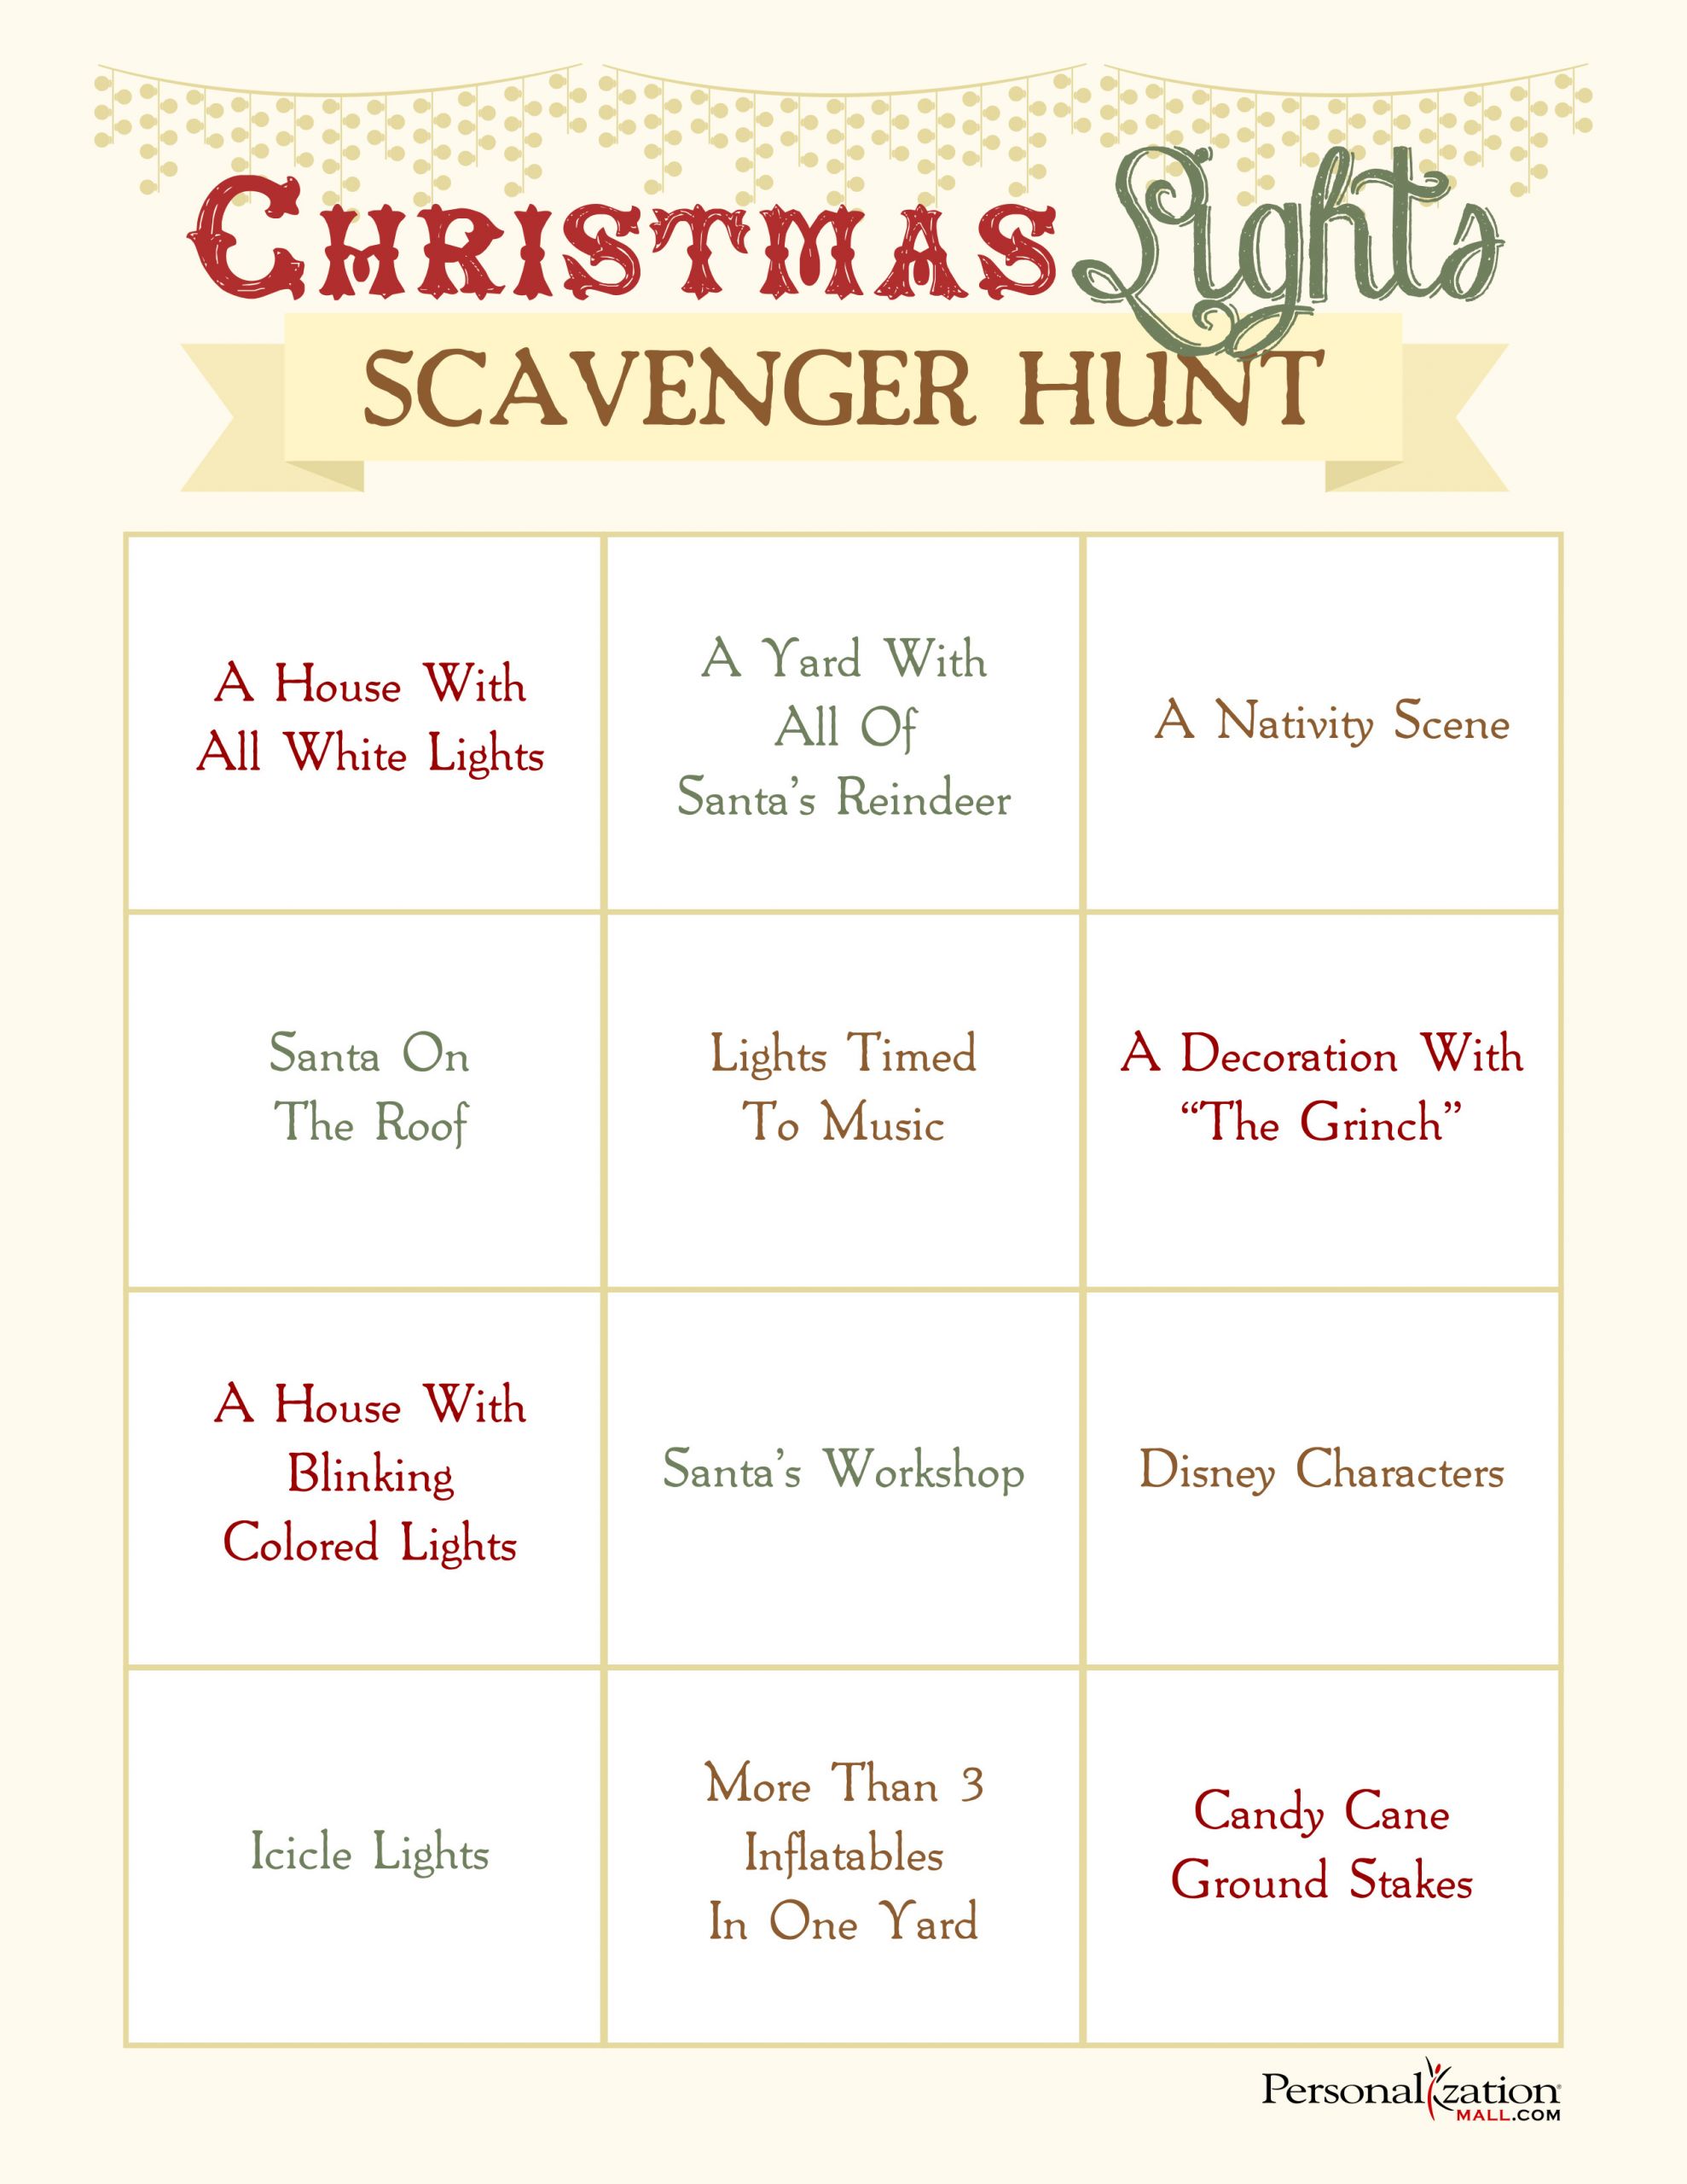 Christmas Party Scavenger Hunt Ideas
 Surprise Them with a Magical Christmas Eve Adventure